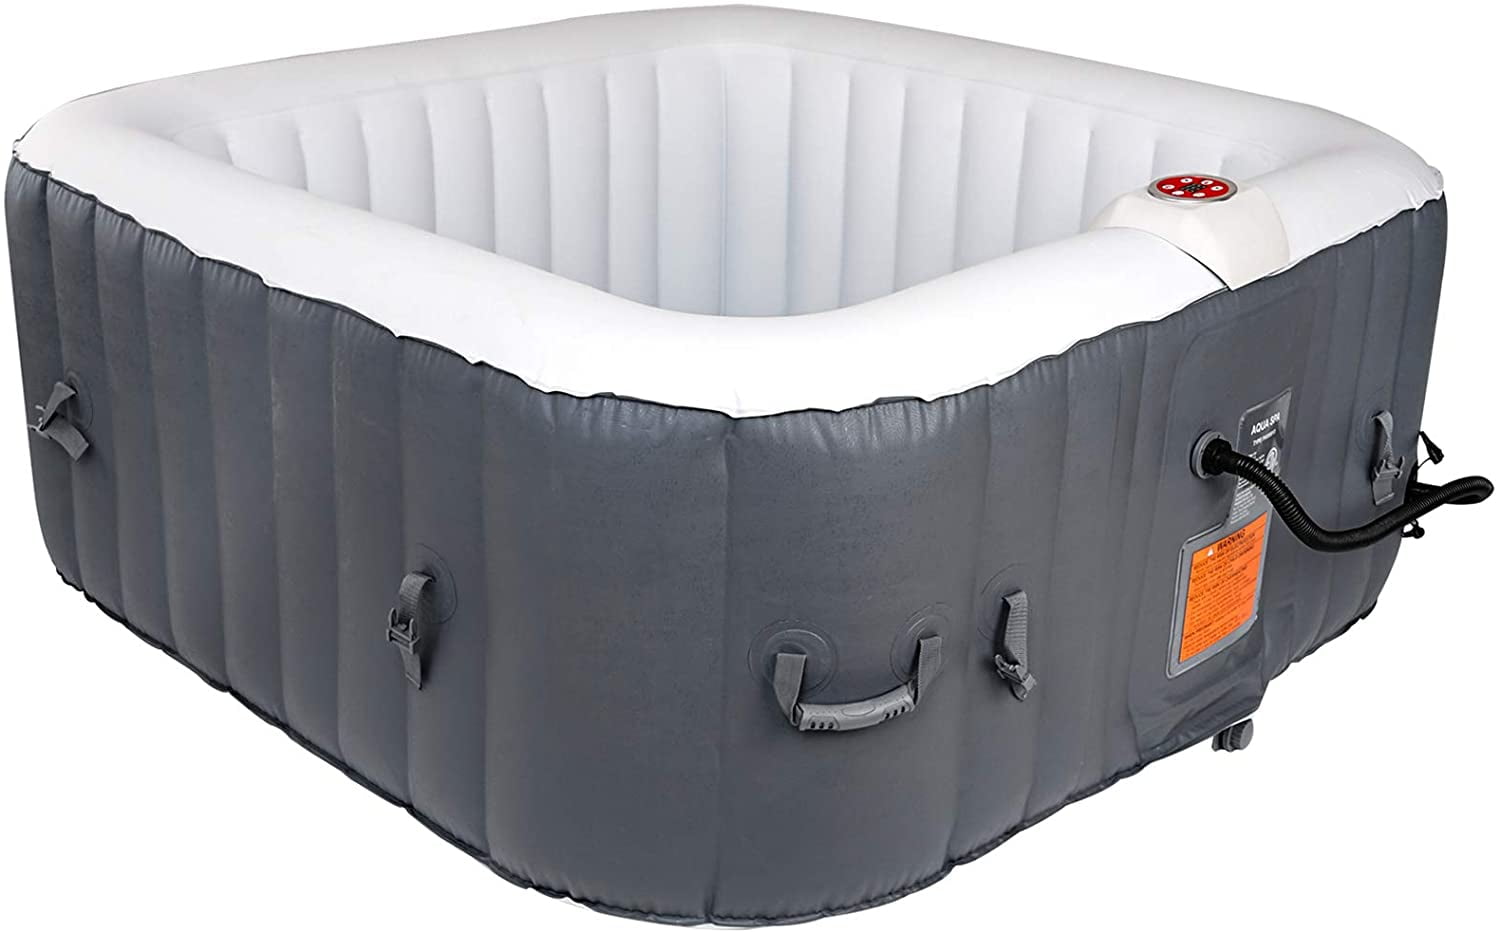 Wejoy Portable Hot Tub Air Jet Spa 2-3 Person Inflatable Outdoor Heated to  max of 104℉(40℃),61X61X26 inch,600 L / 158 Gal,Grey 